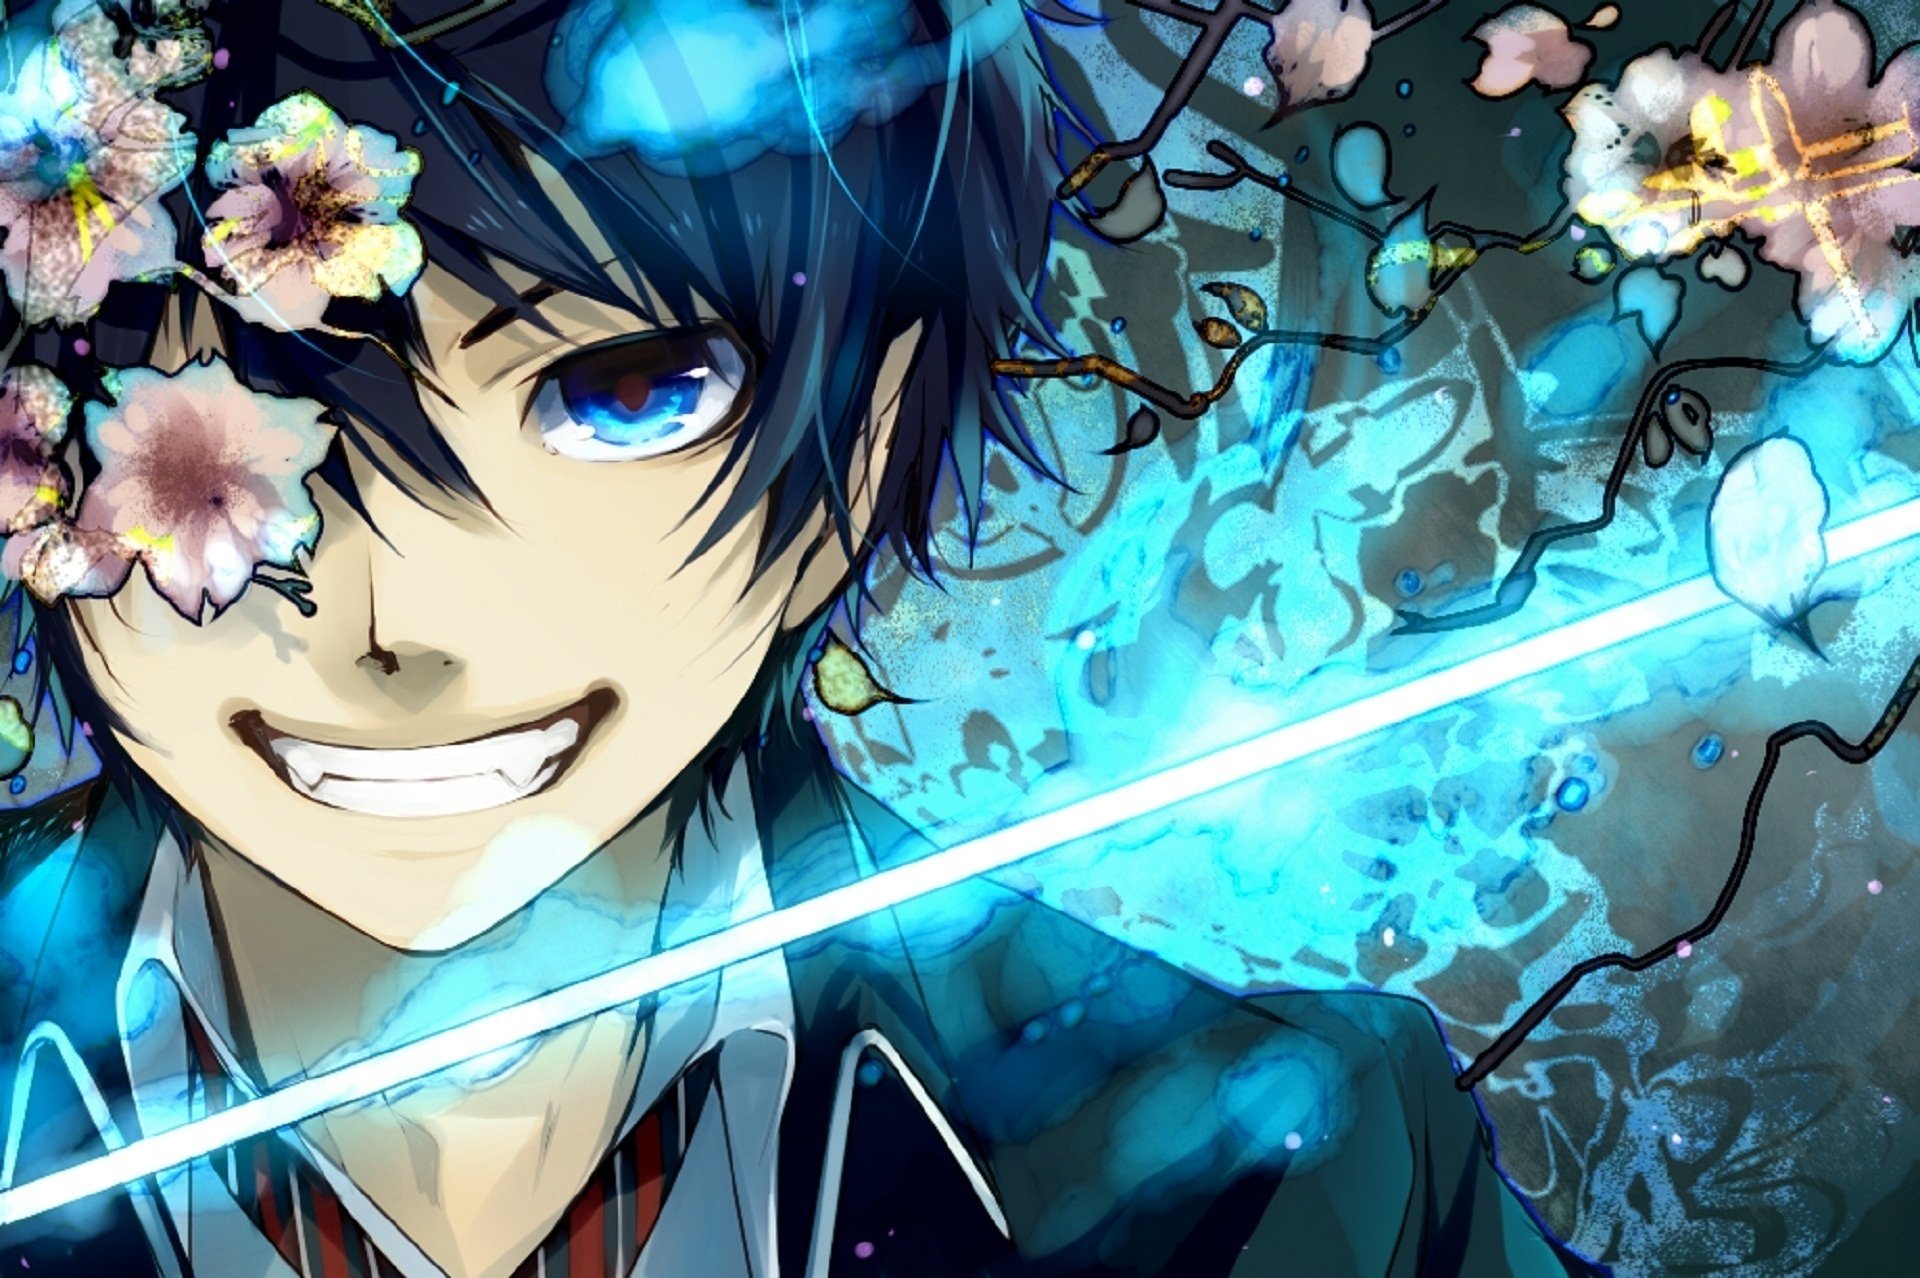 Hd Wallpaper Do Anime Ao No Exorcist 201921 Hd Wallpaper And Backgrounds Download